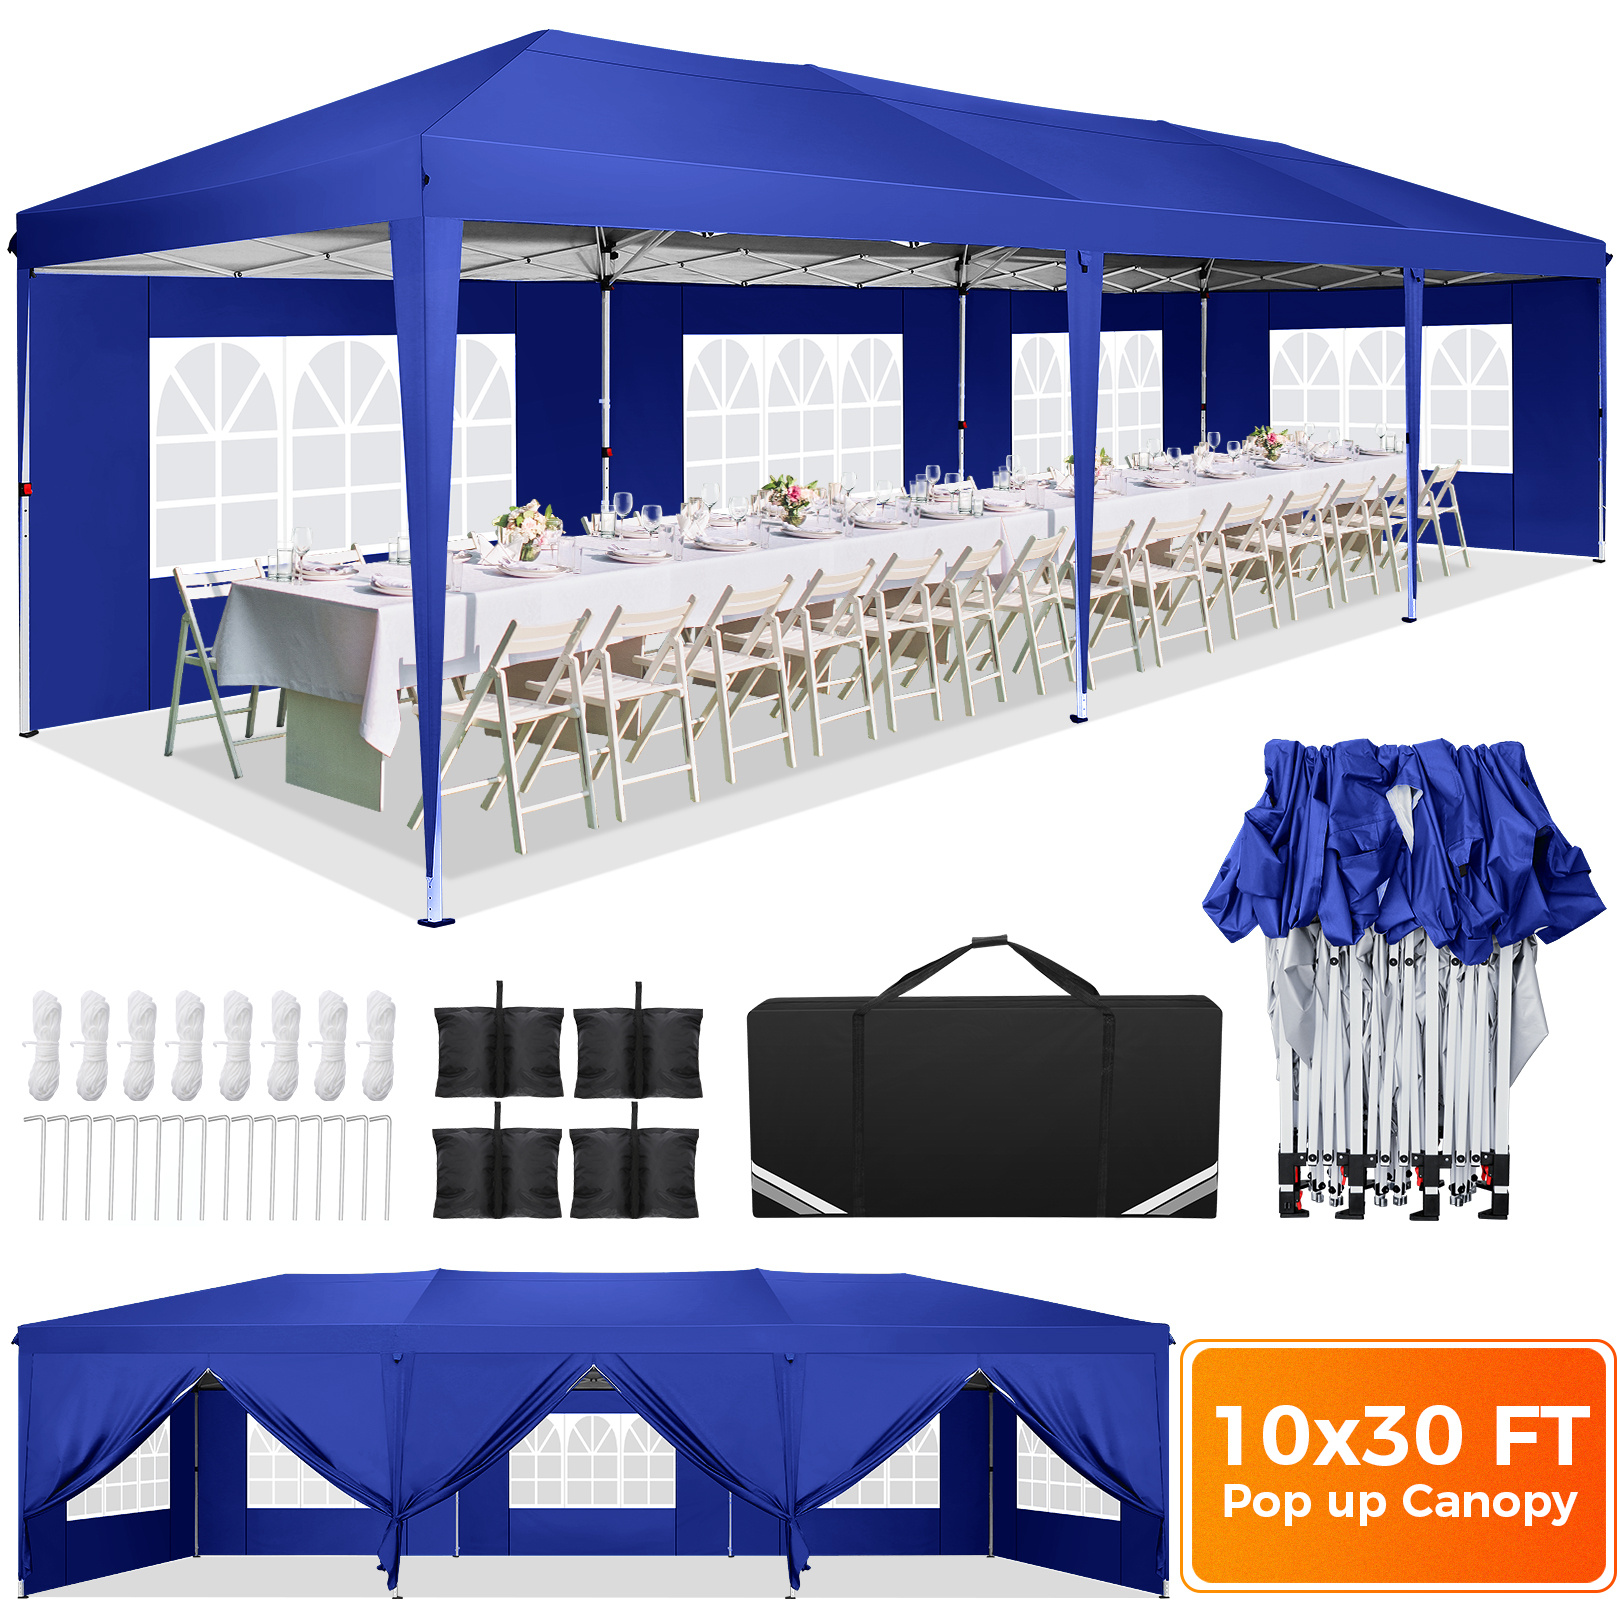 

10x30 Pop Up Canopy Tent With 8 Sidewalls Waterproof Outdoor Party Tent Canopy Tents For Parties Camping Commercial Event Gazebo Portable Tent For Backyard Wedding With Sandbags,